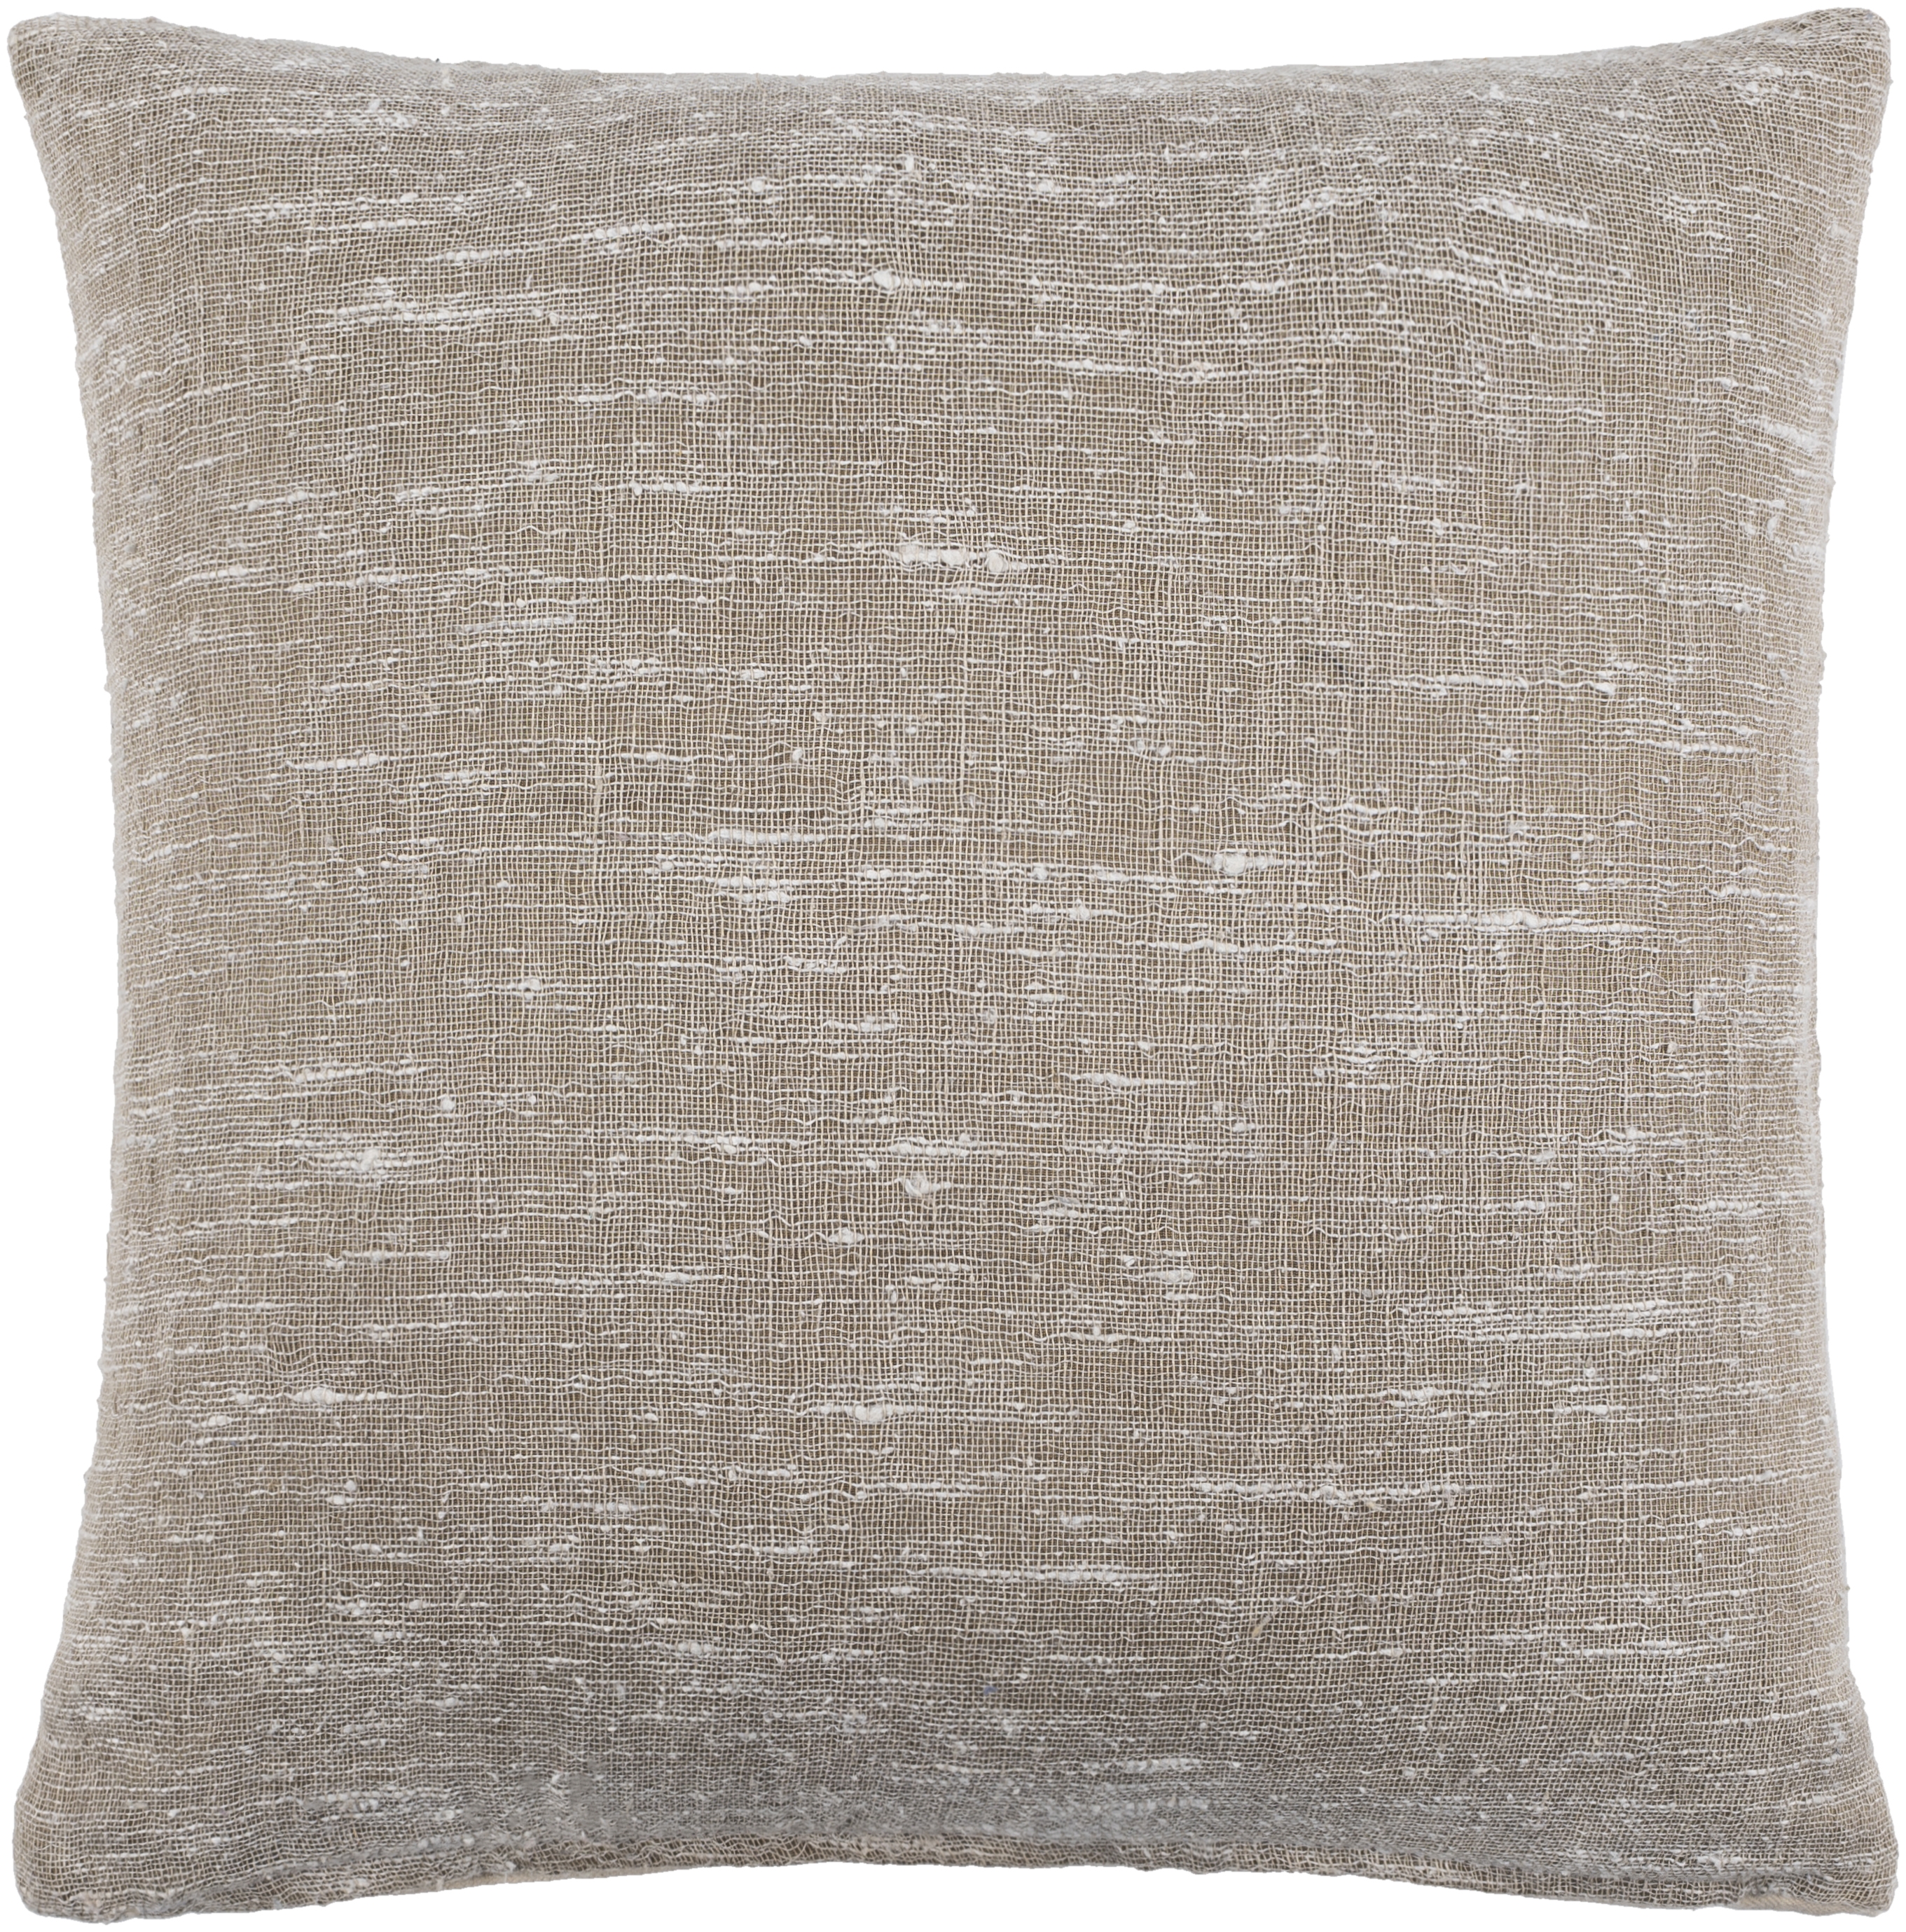 Romona Throw Pillow, 22" x 22", with down insert - Image 0